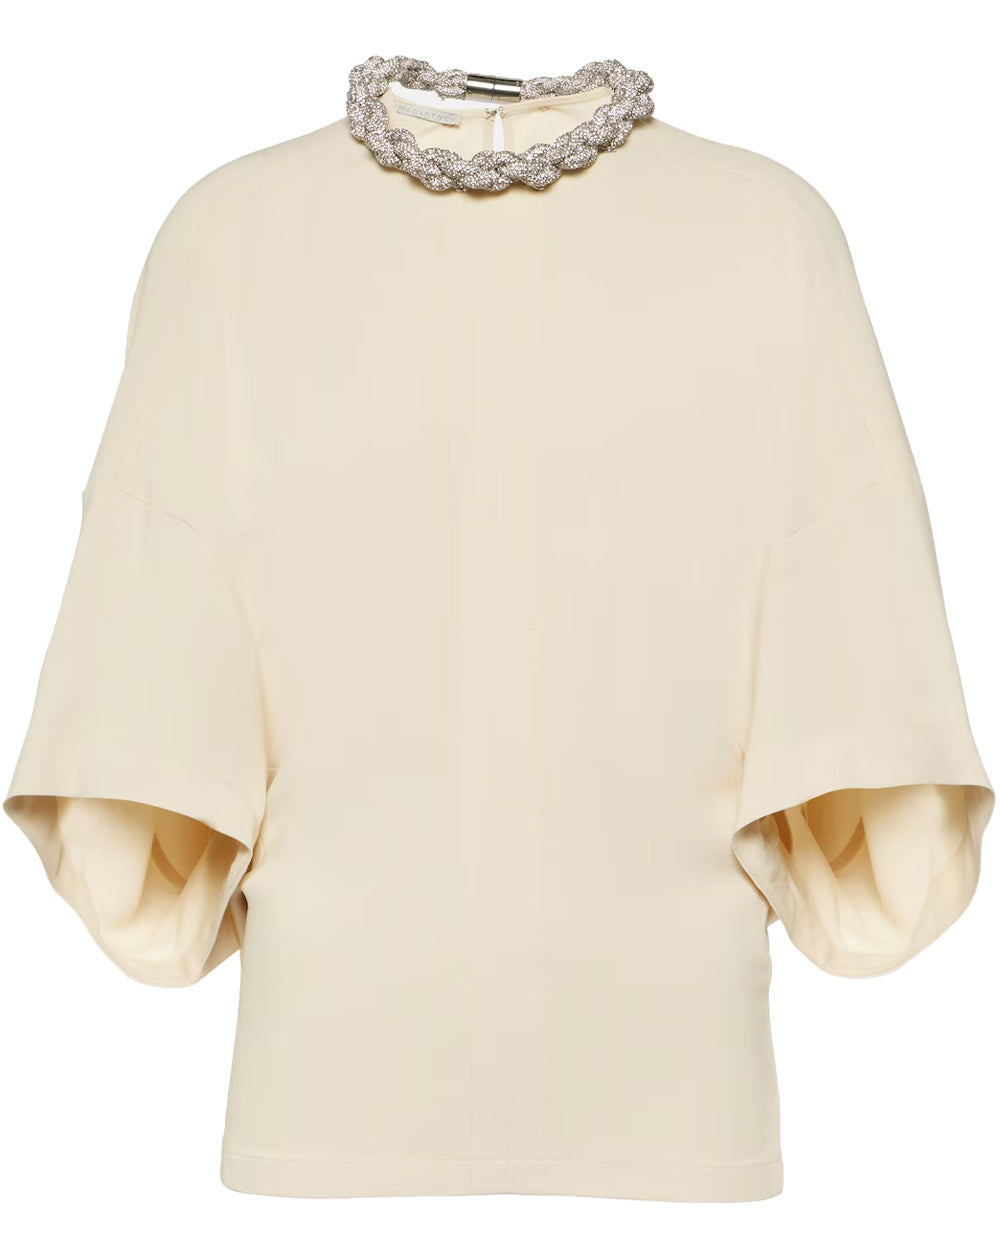 Gesso Cady Chain Blouse